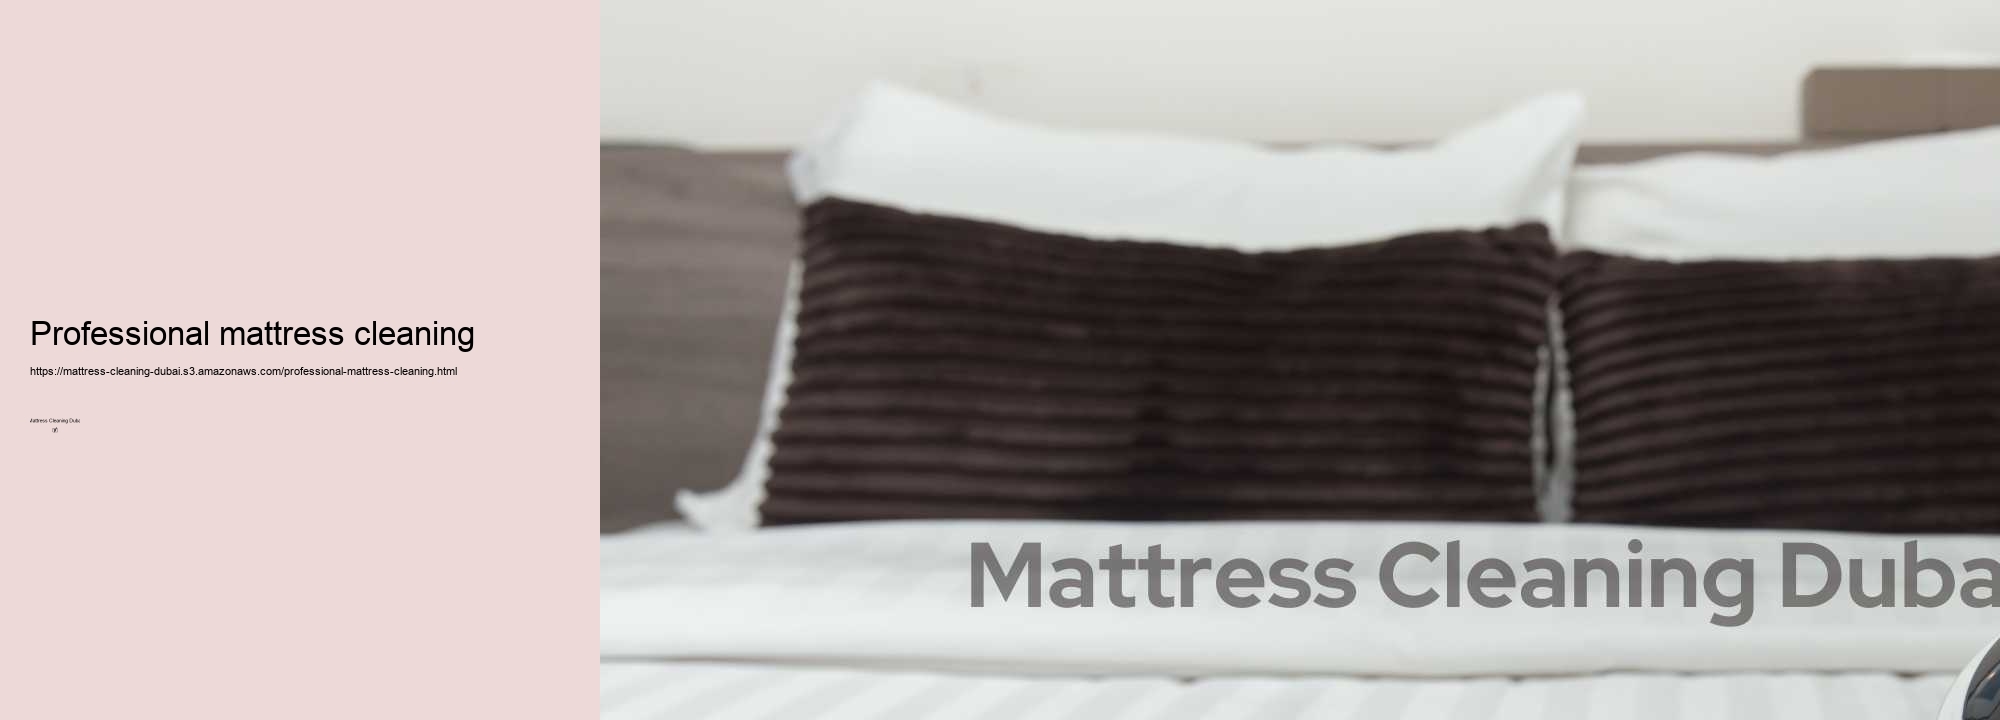 Professional mattress cleaning